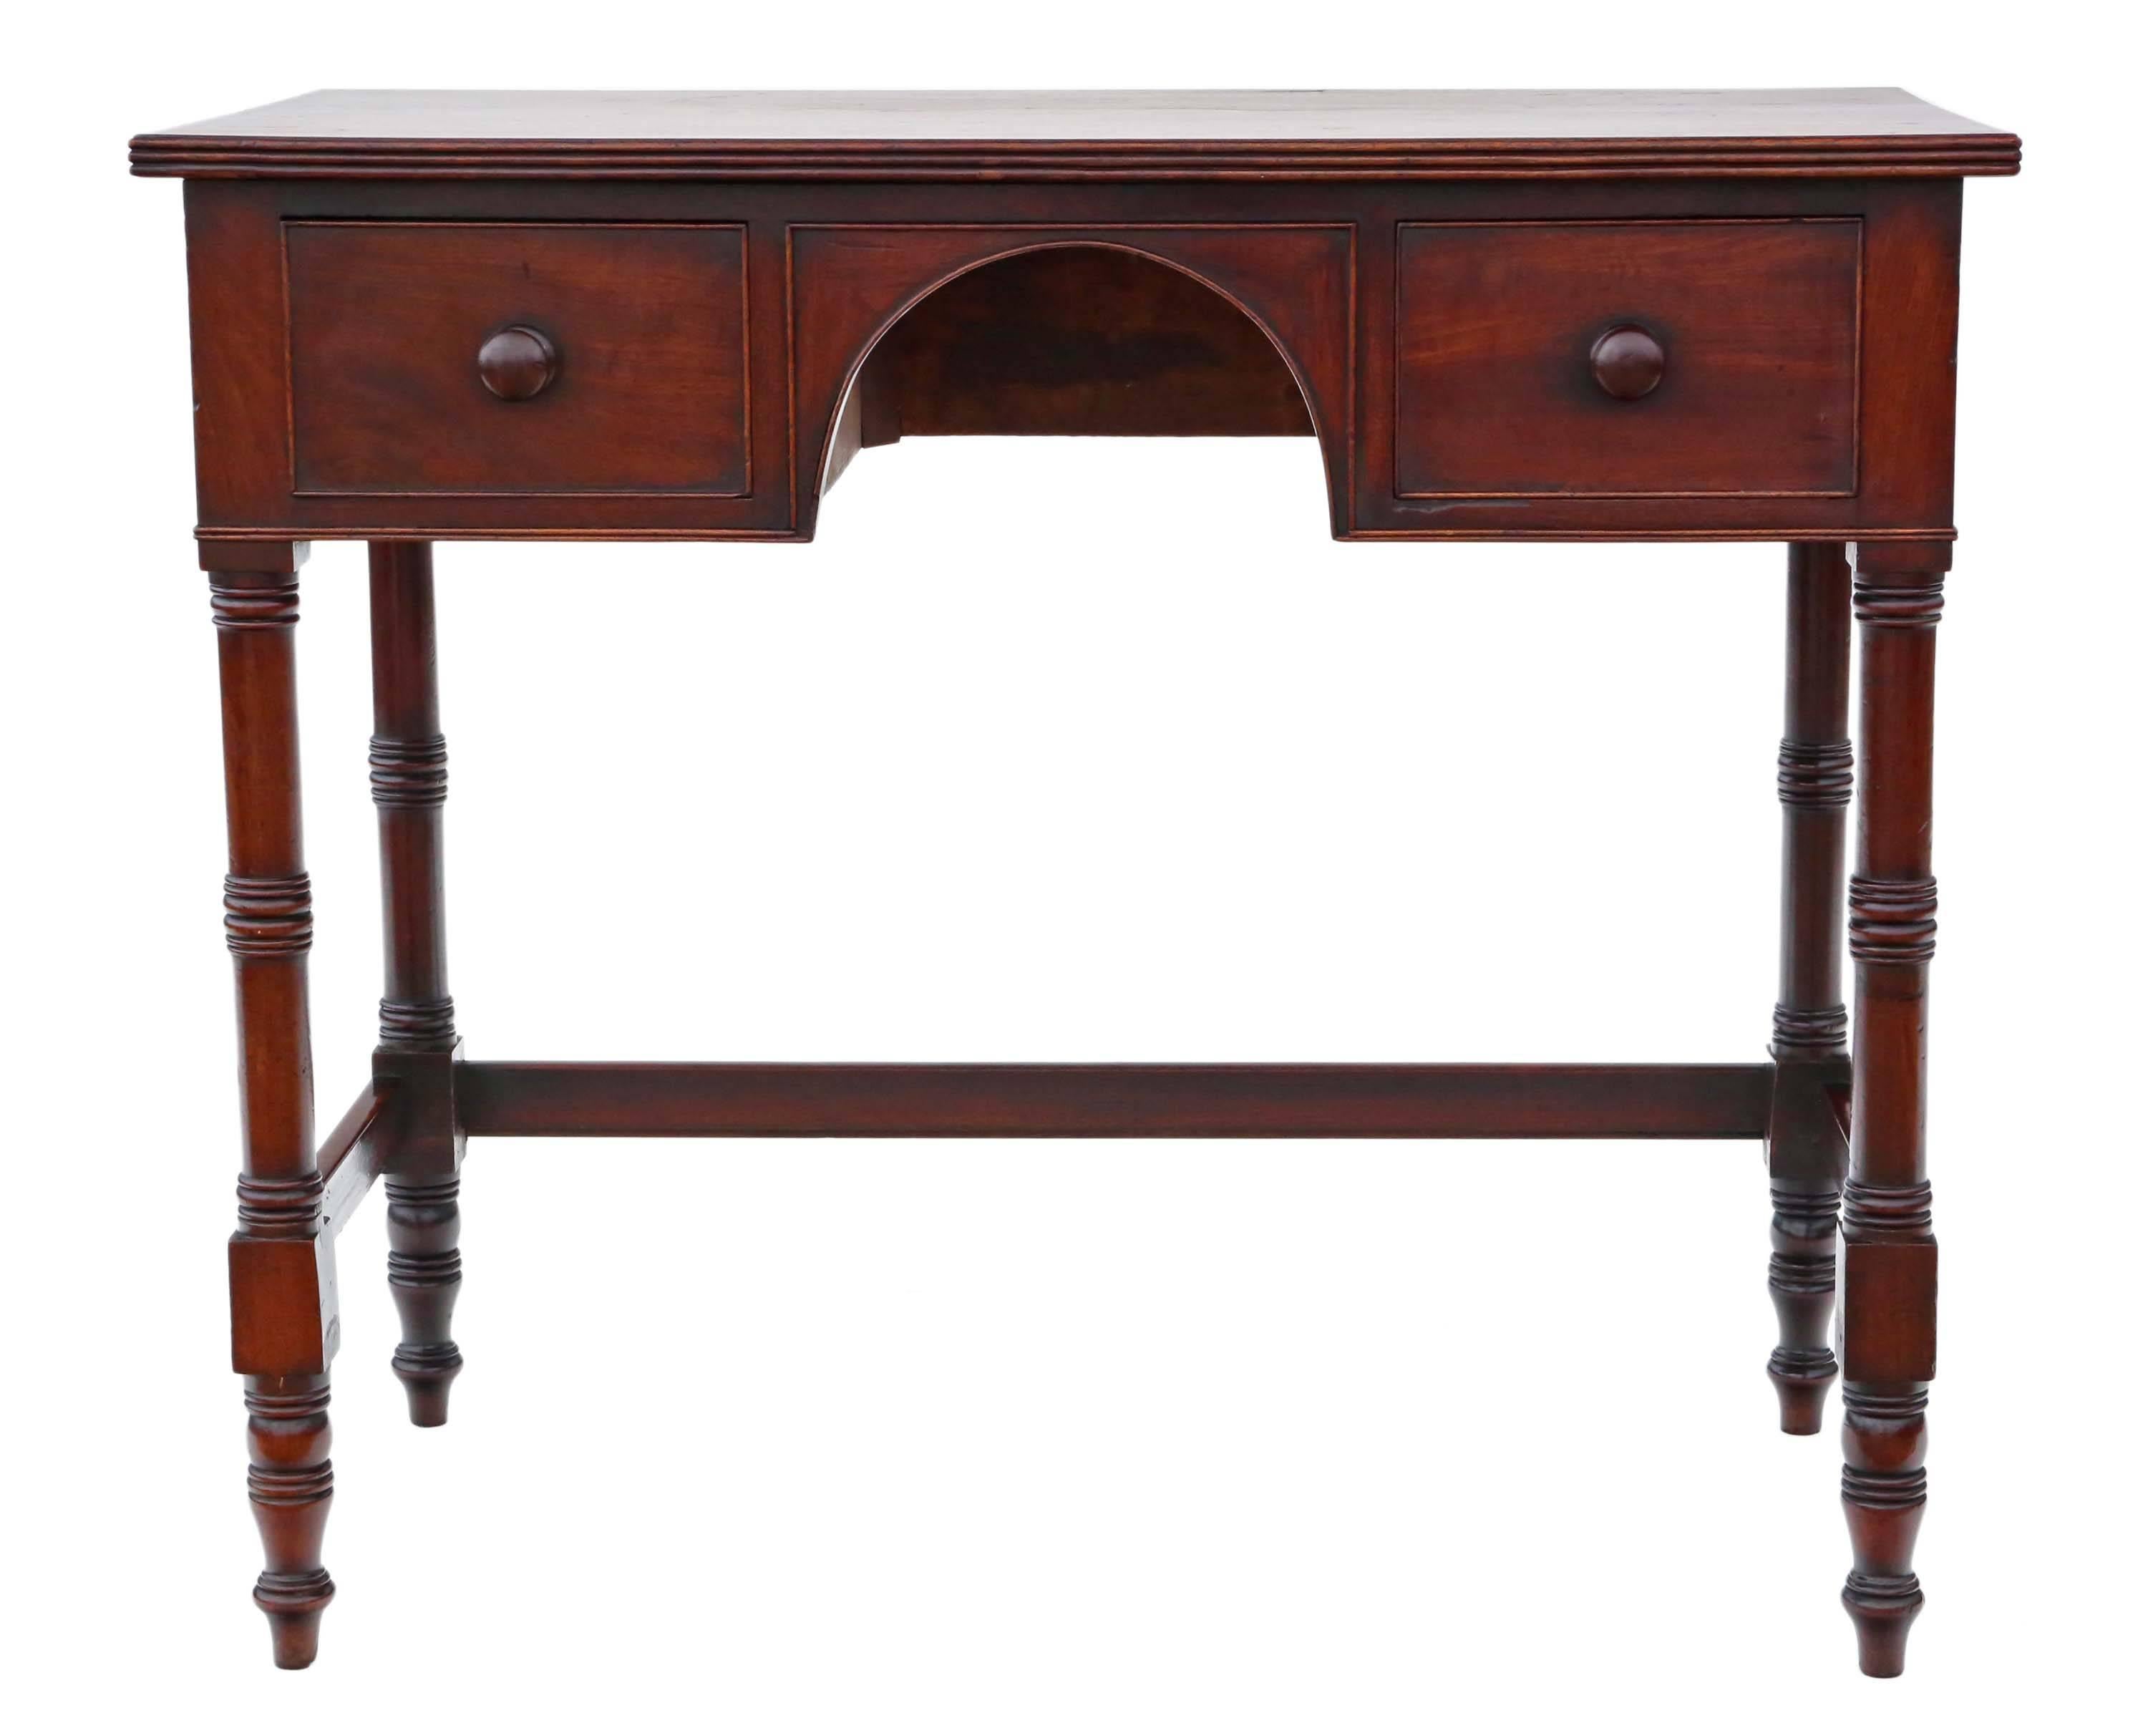 Antique Regency circa 1825 and later mahogany desk or writing table.

No loose joints and no woodworm. Full of age, character and charm. The oak lined drawers slide freely.

Would look great in the right location!

Overall maximum dimensions: